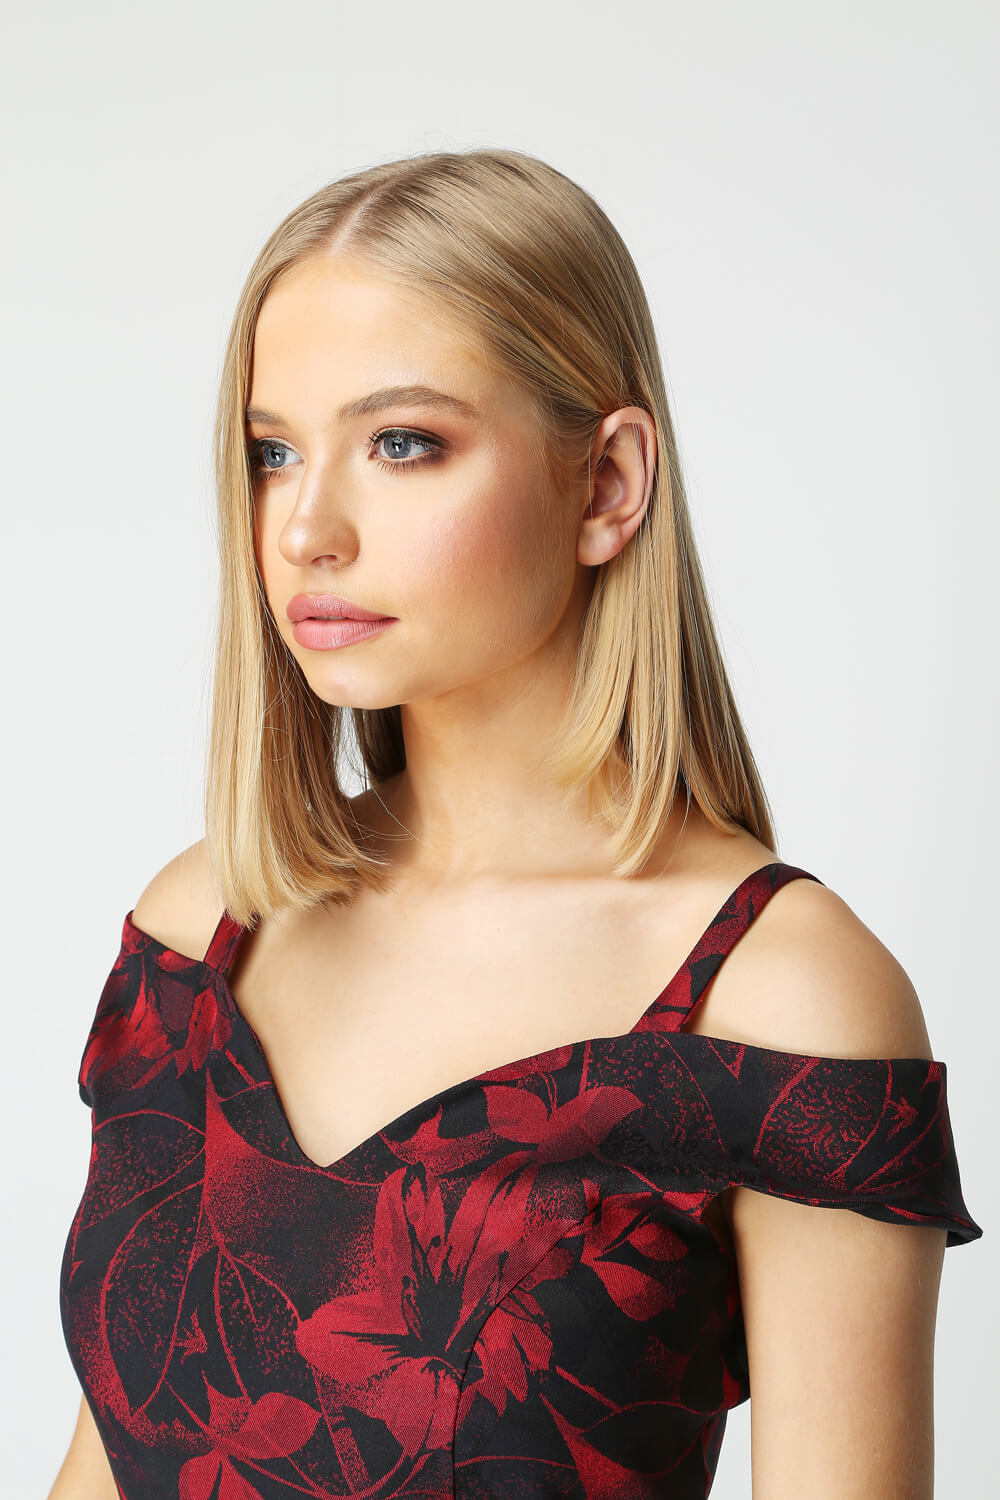 Black Floral Fit and Flare Dress, Image 3 of 4